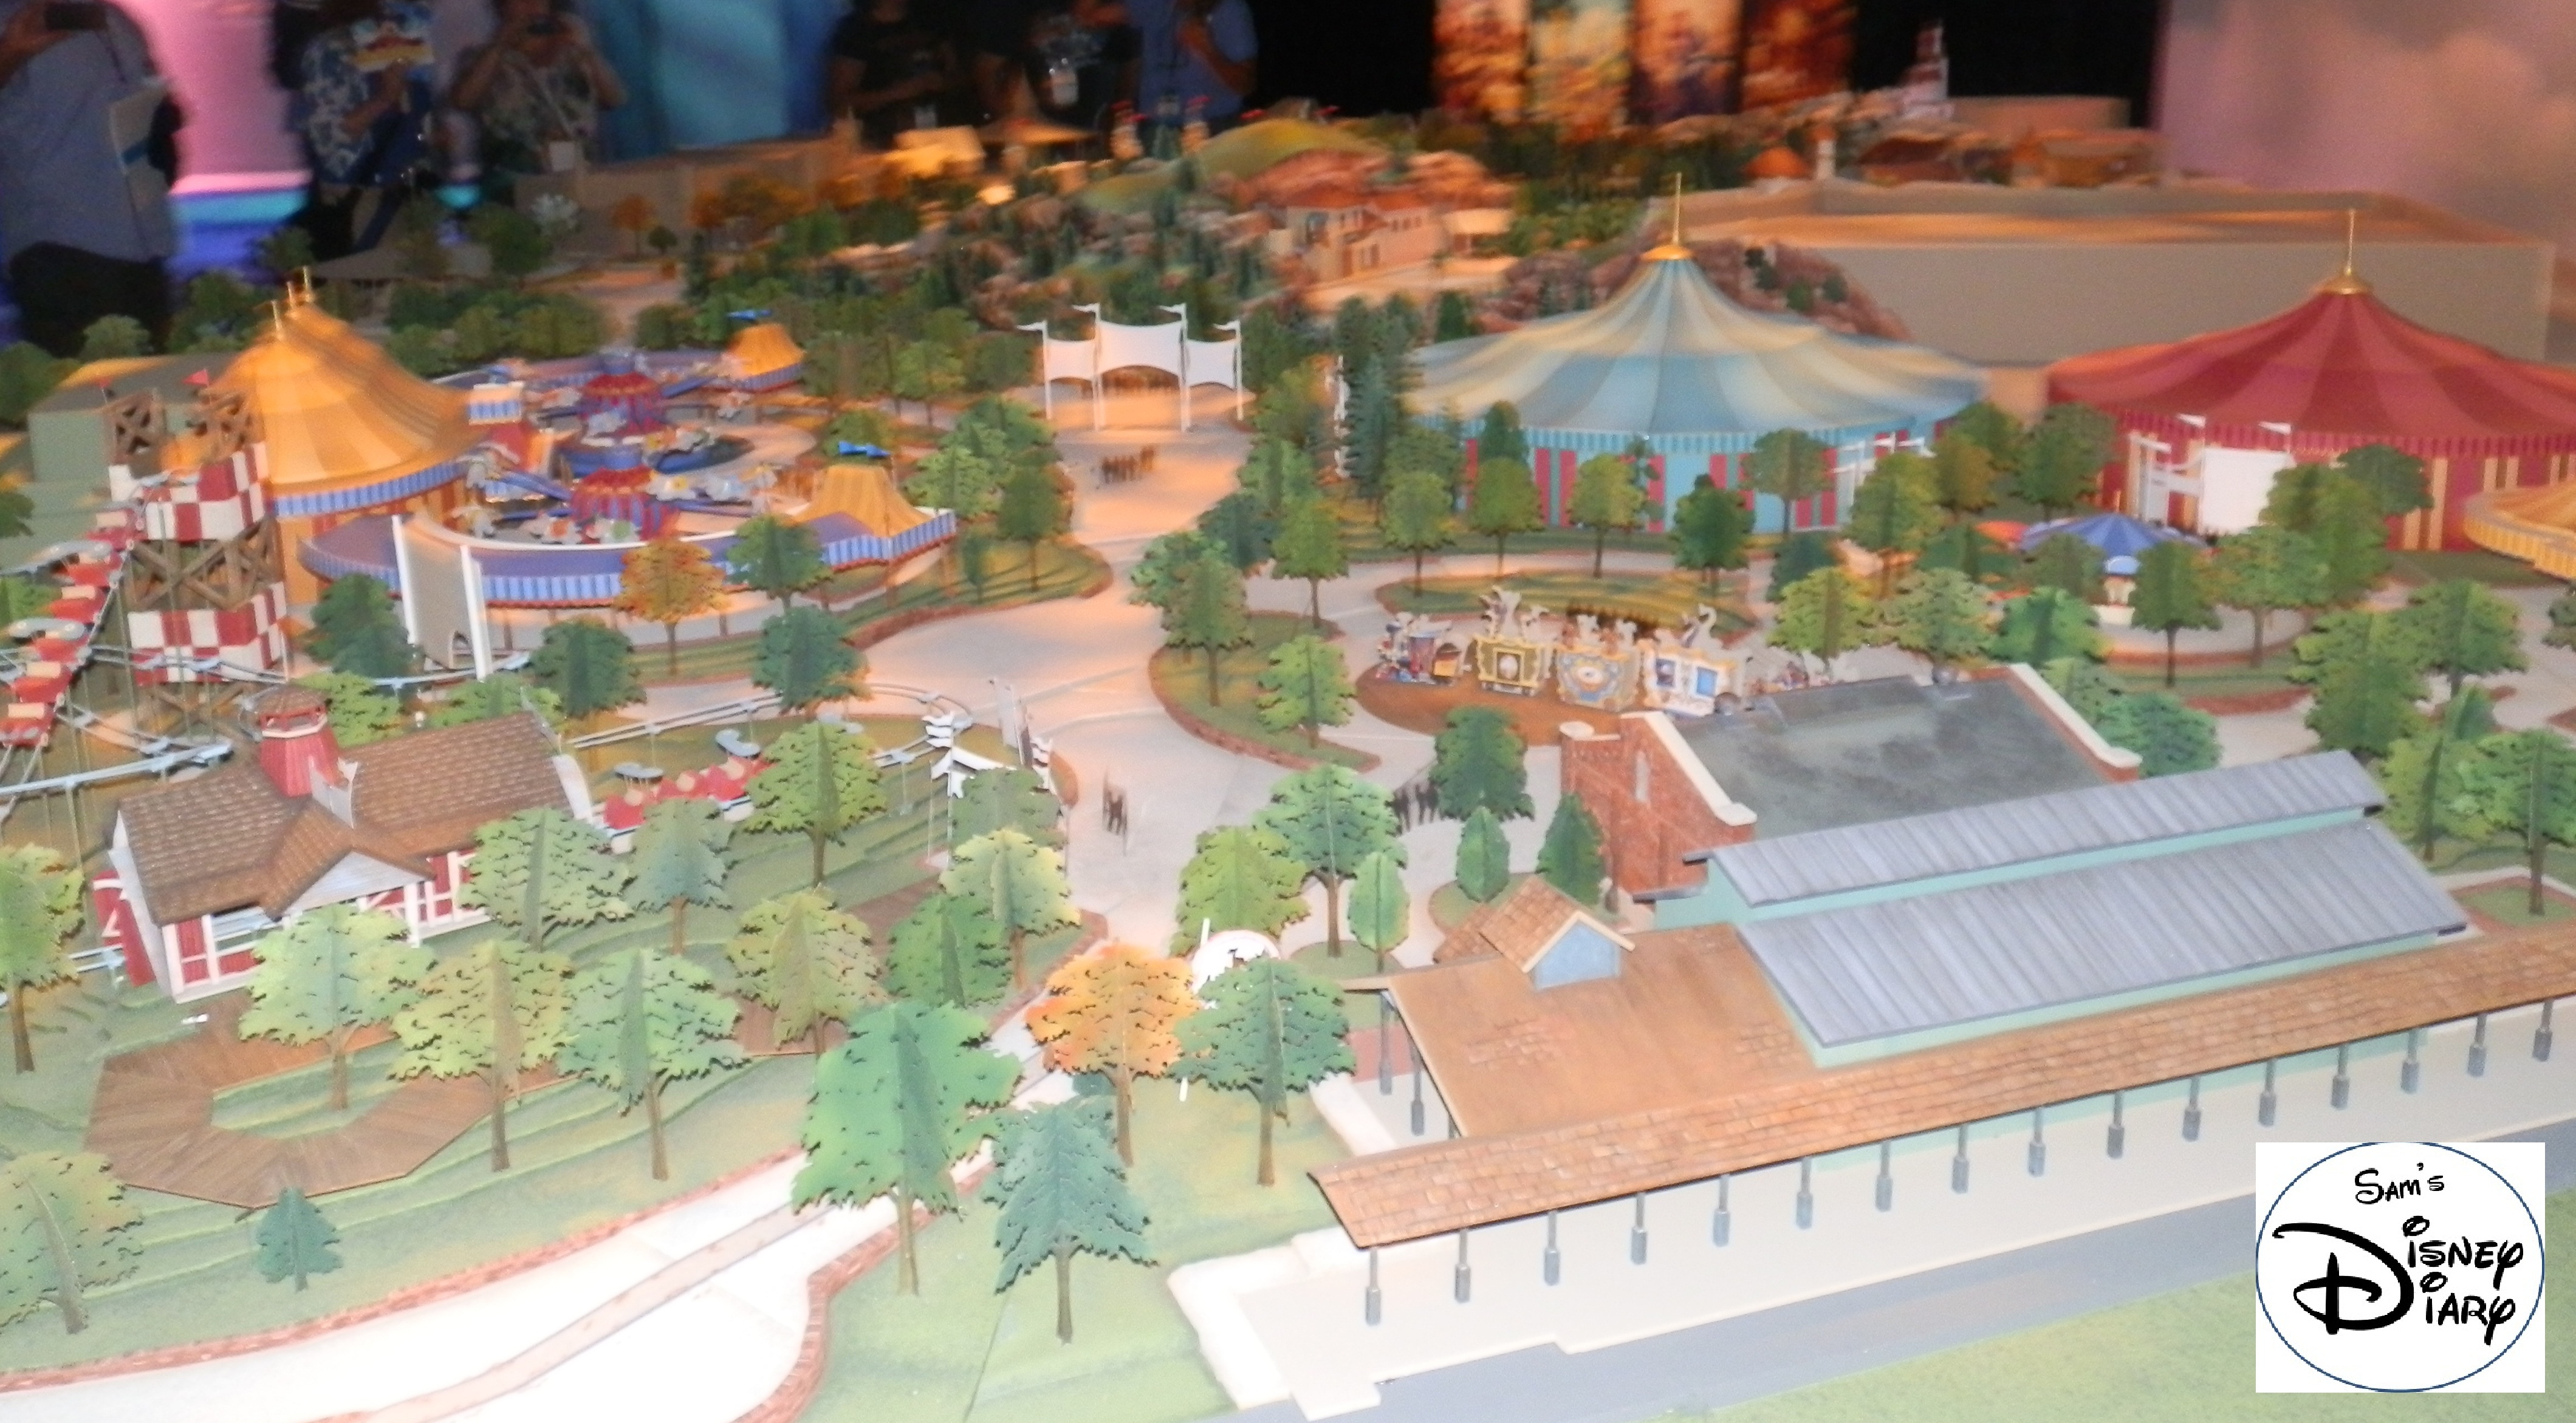 Storybook Circus Concept Model (August 2011)